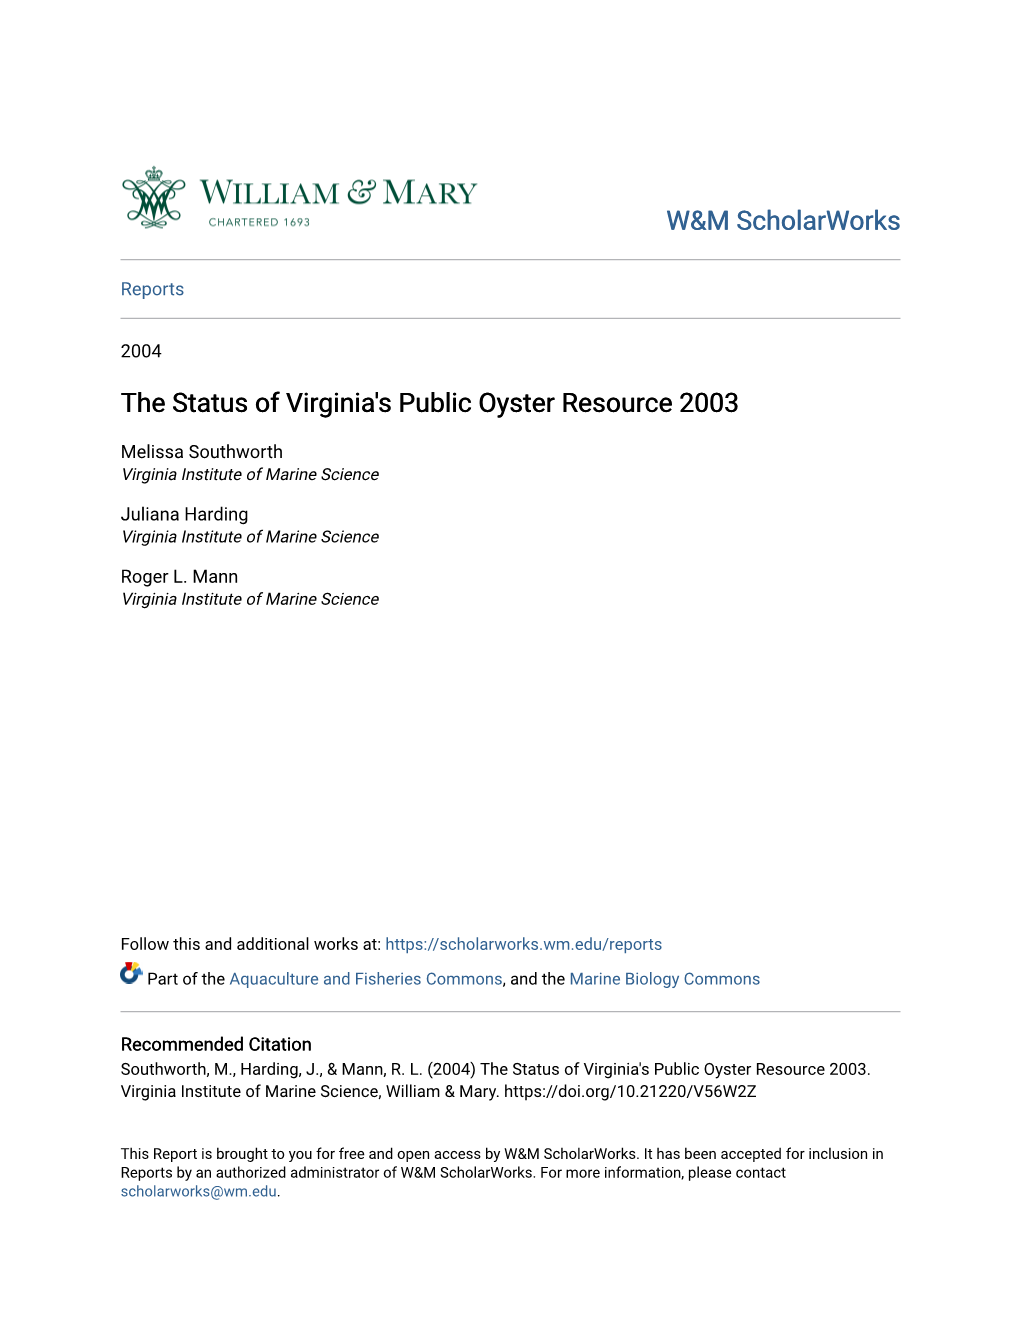 The Status of Virginia's Public Oyster Resource 2003